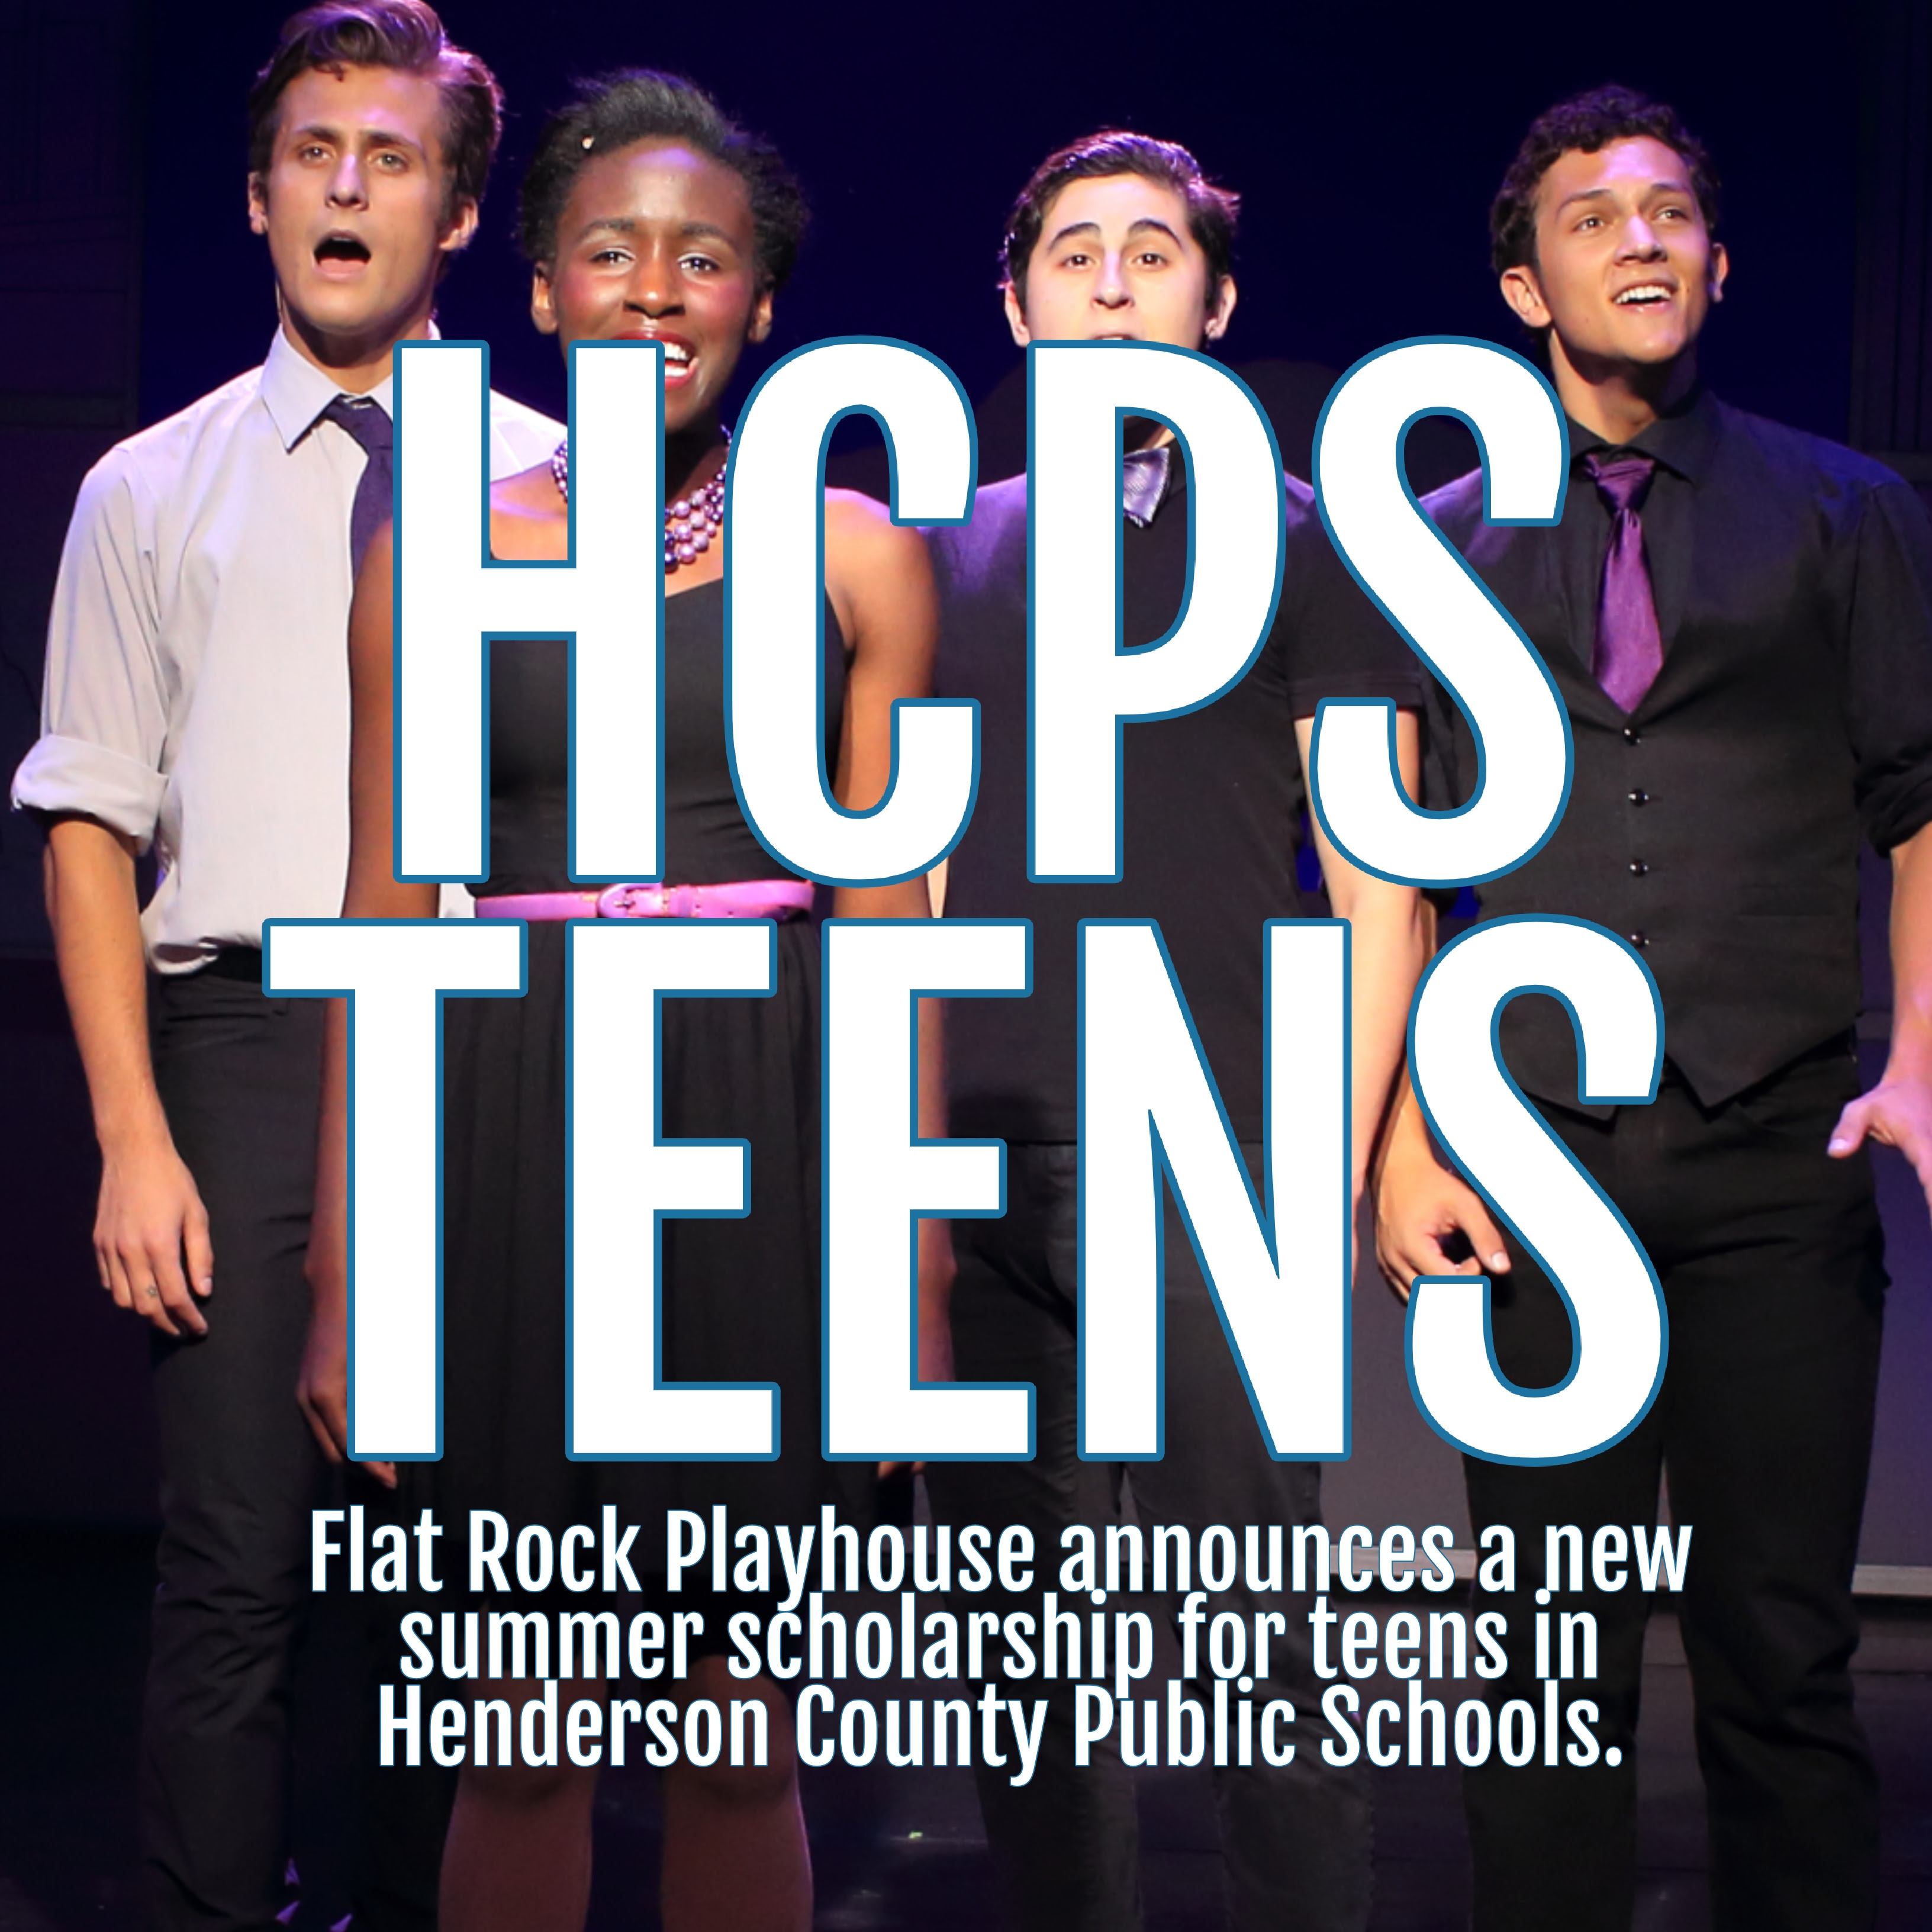 One young woman singing on stage
              with three young men. HCPS Teens. Flat Rock Playhouse
              announces a new summer scholarship for teens in Henderson
              County Public Schools.